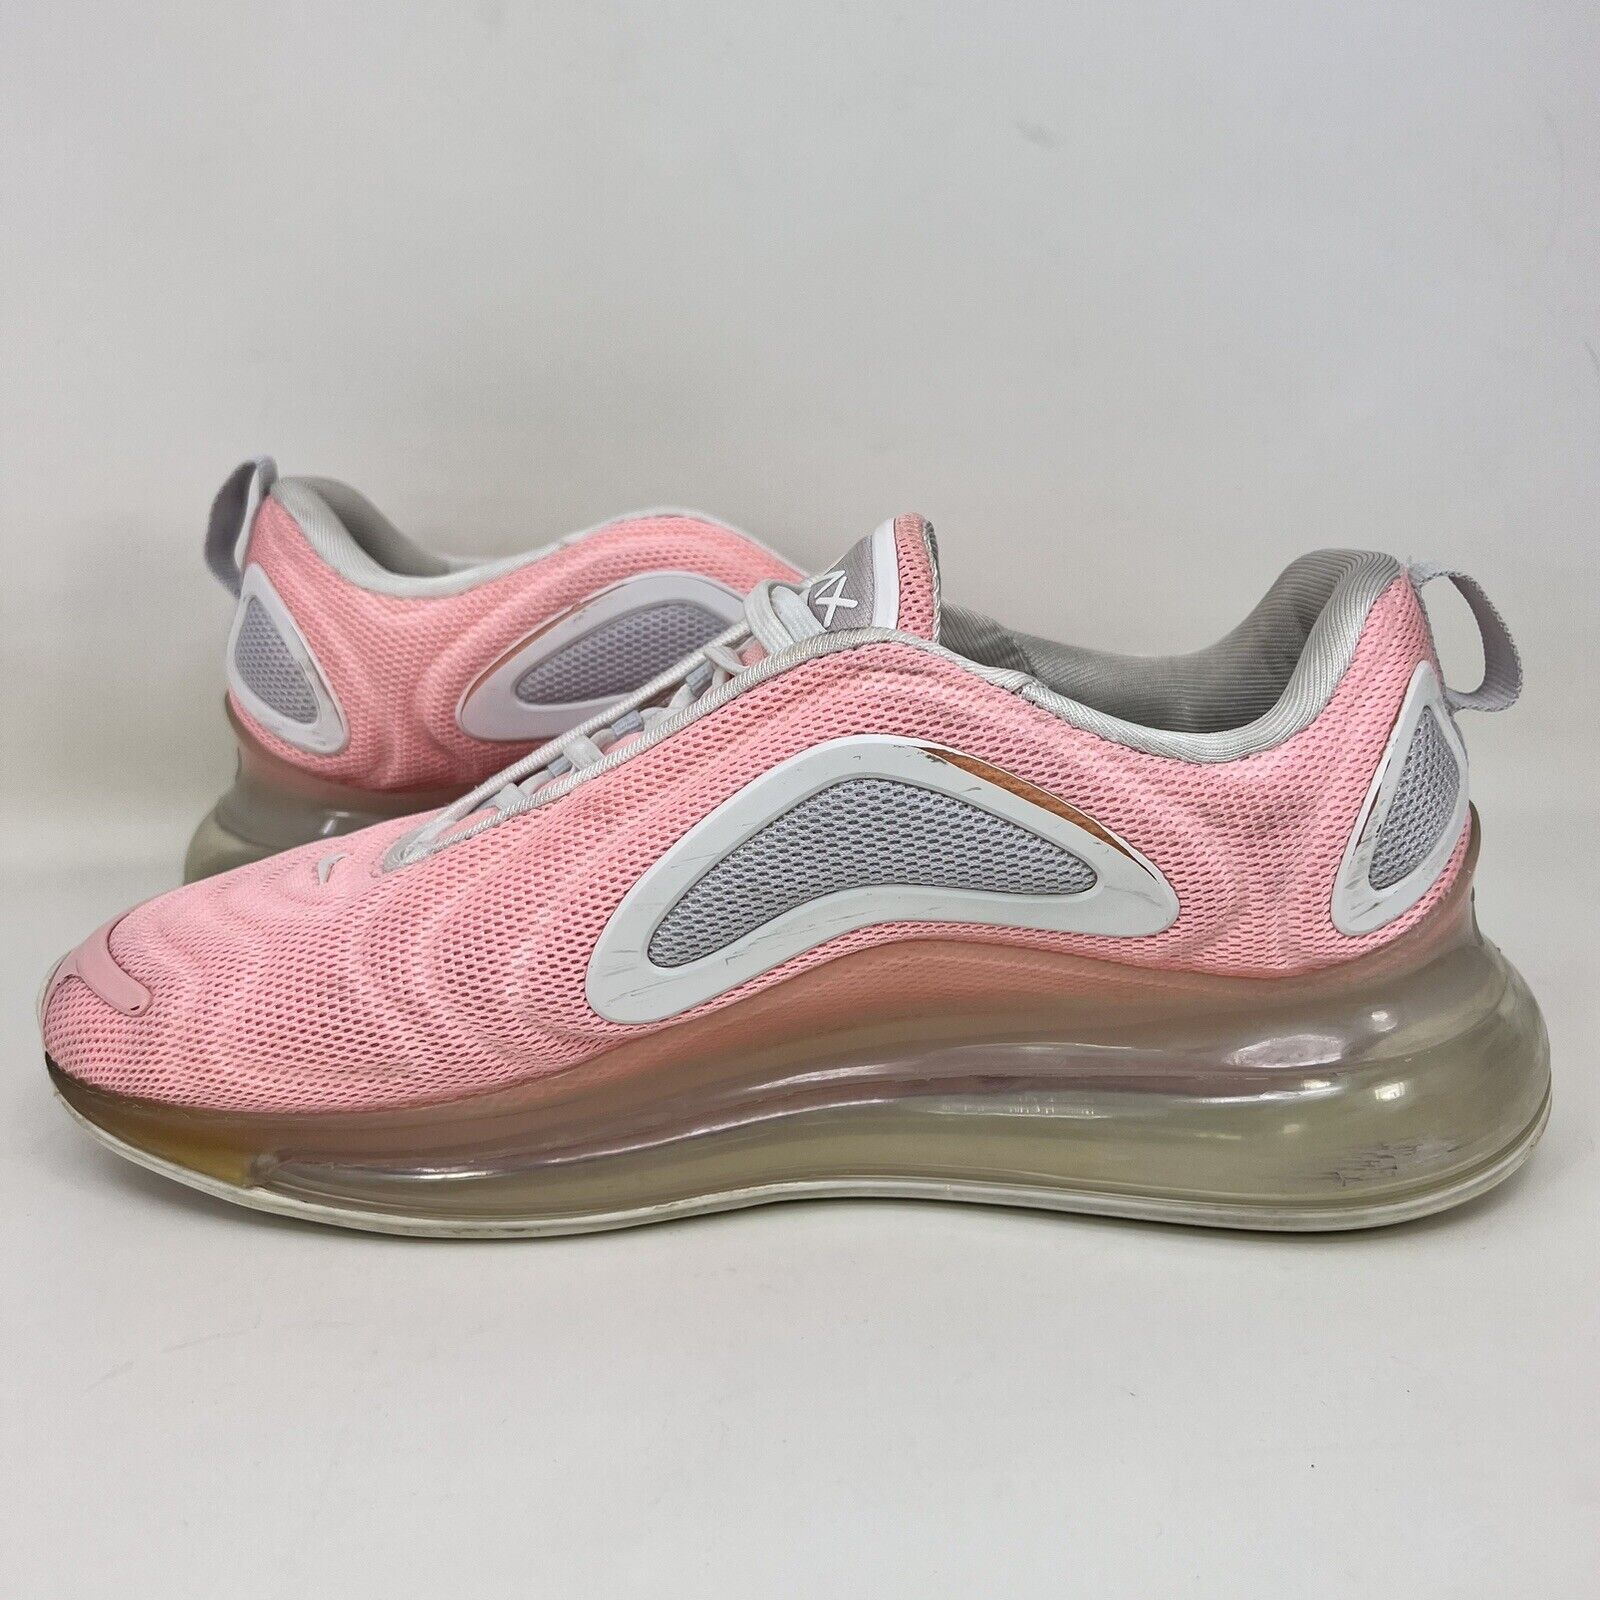 Nike Air Max 720 Running Shoes Pink White Women’s Size 9.5